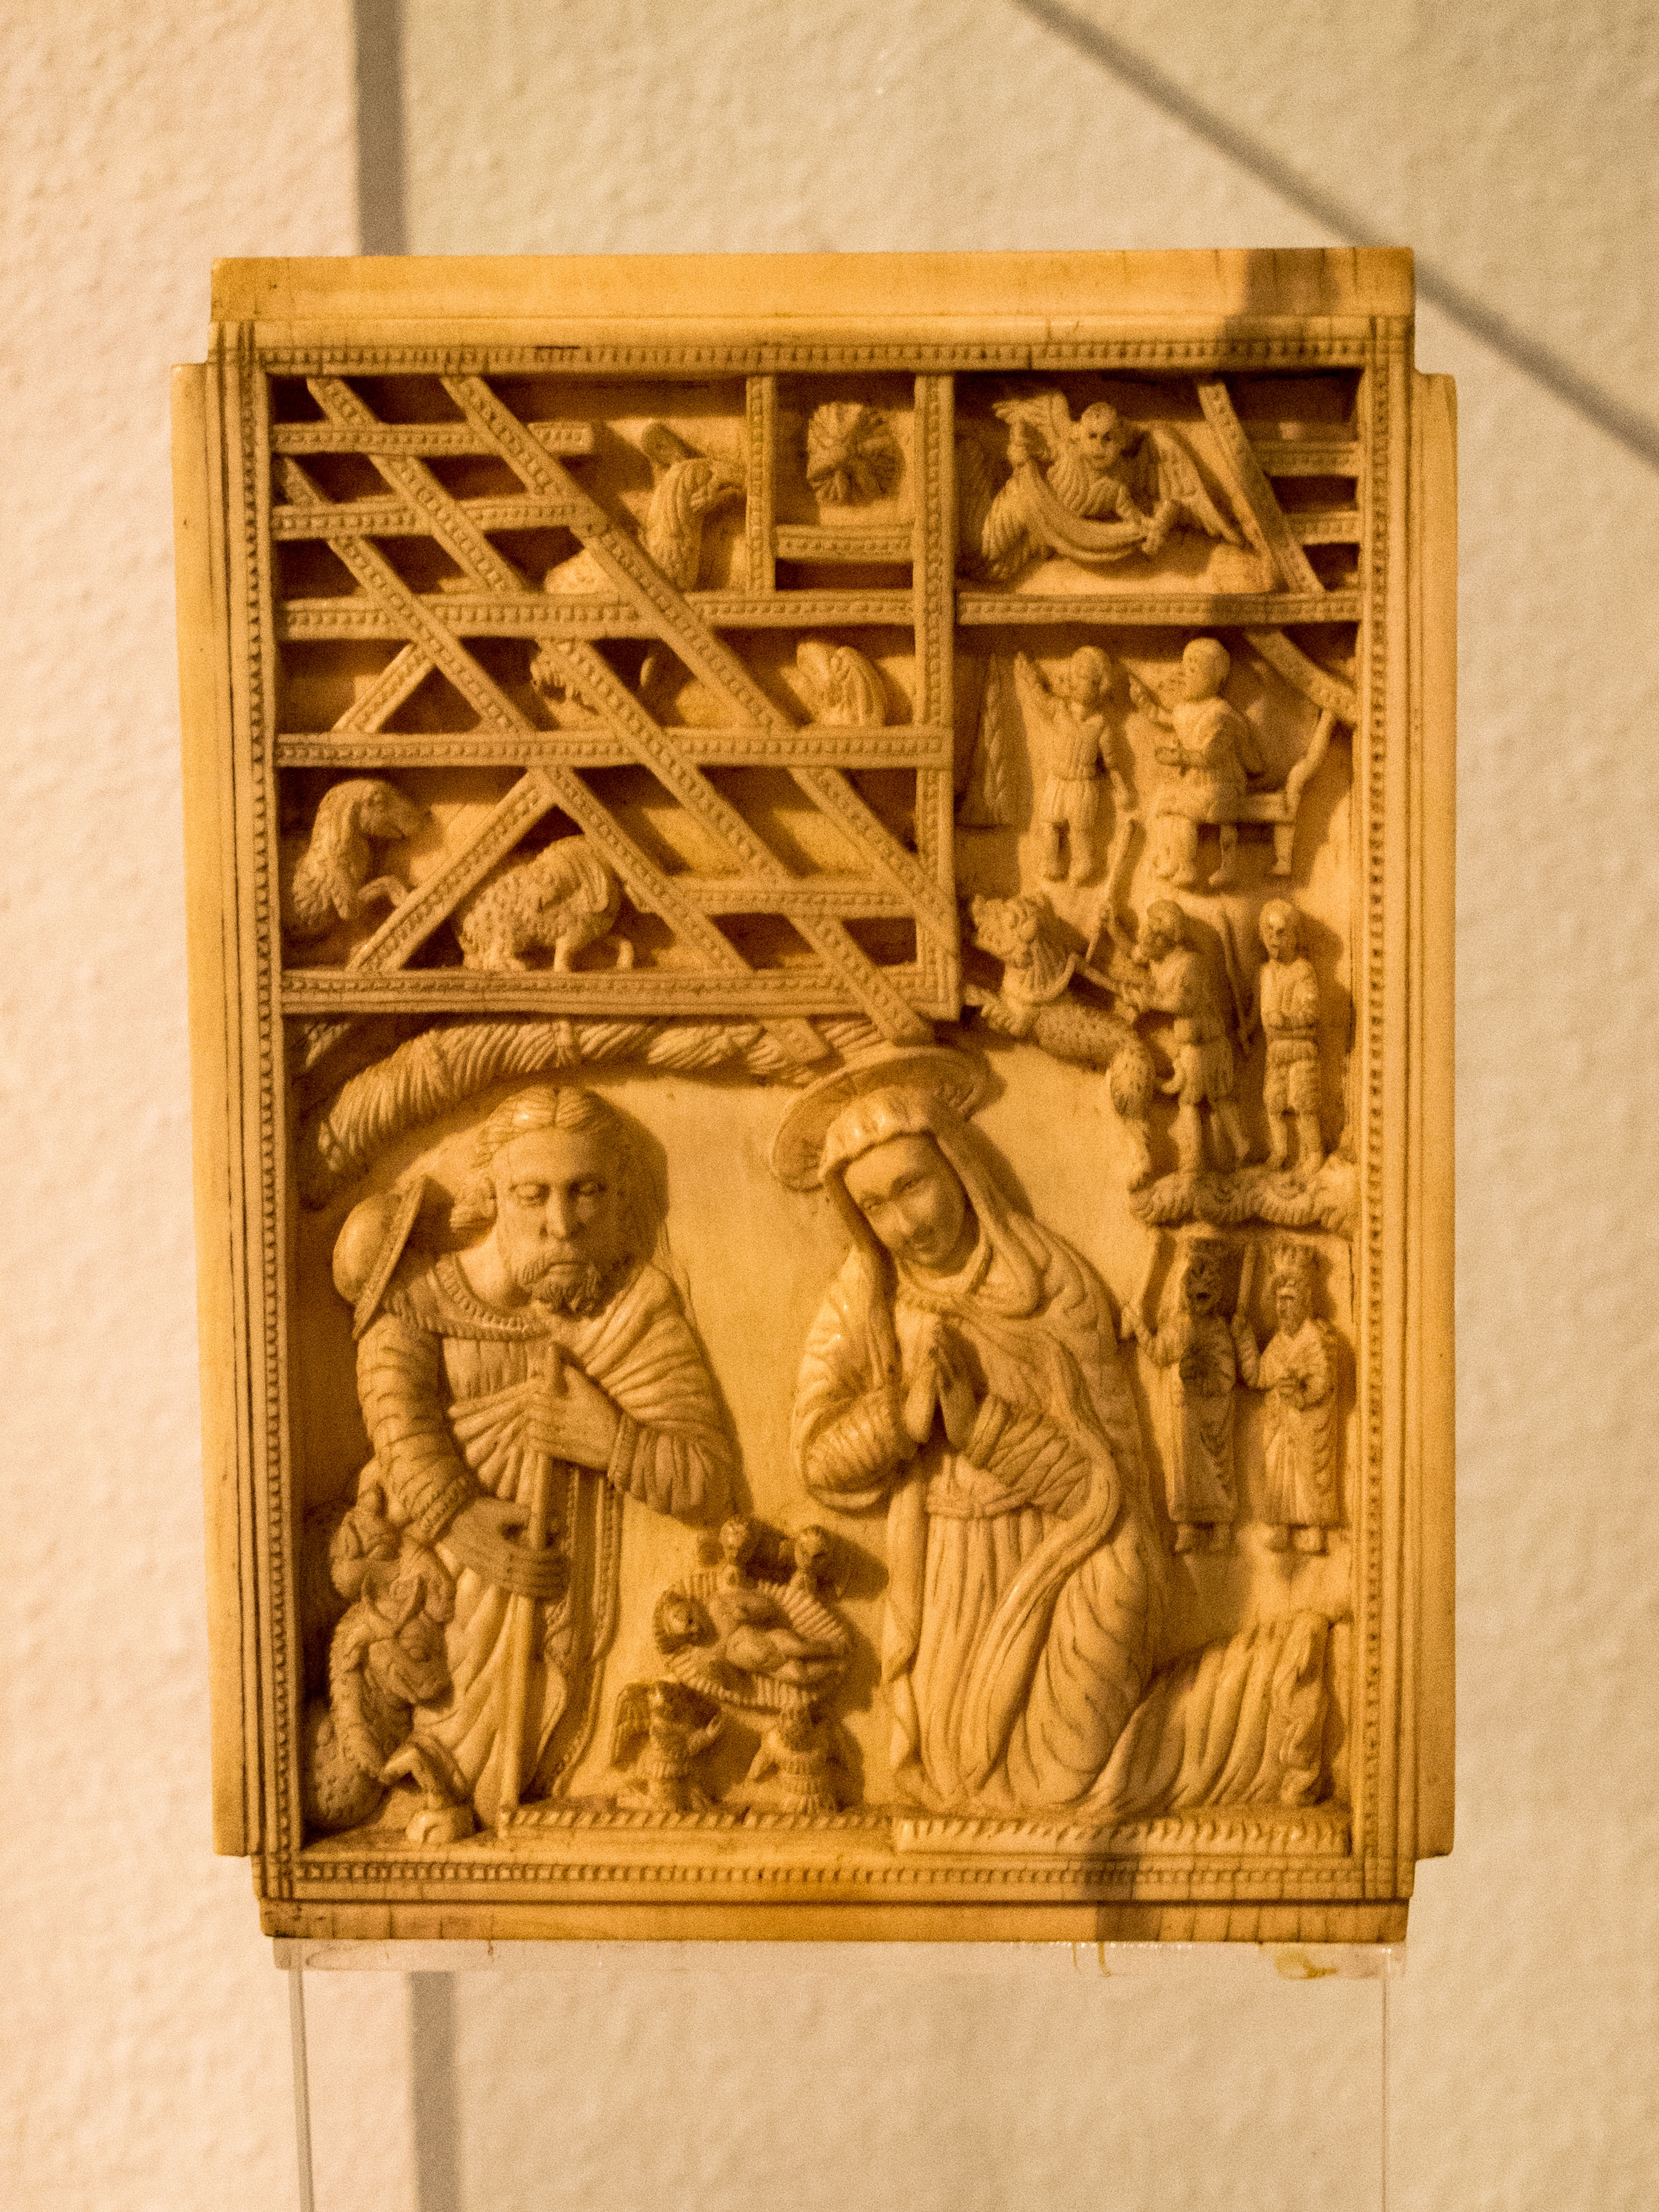 Ivory plaque representing the Nativity of Christ